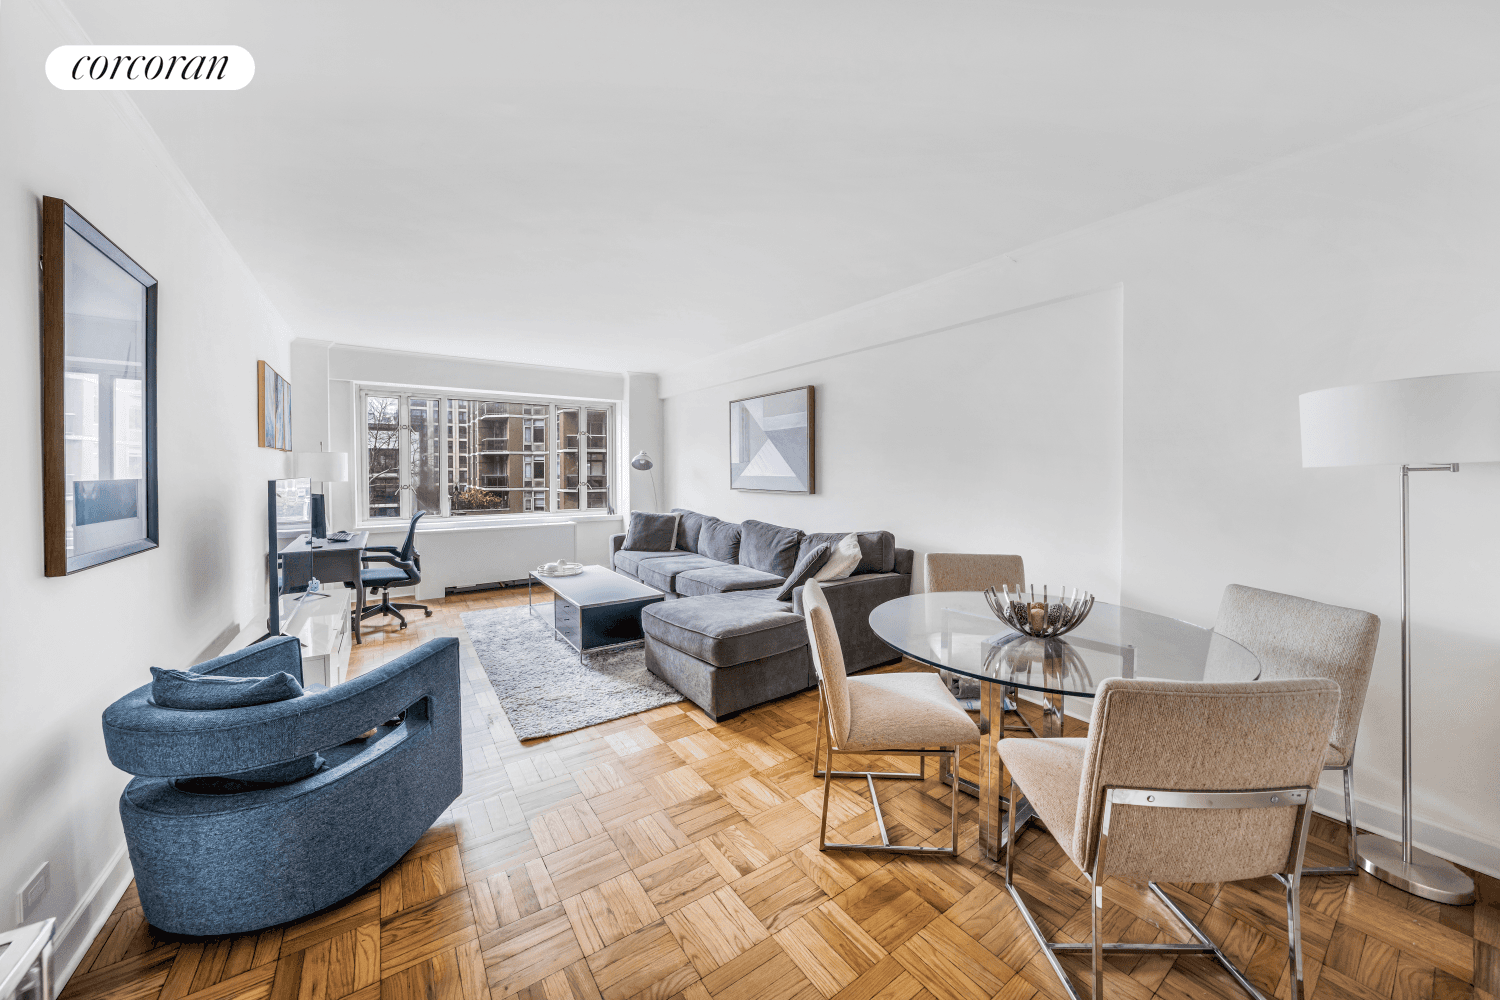 Welcome to 6D, a bright and welcoming condominium home at 166 East 63rd Street, where classic meets modern.